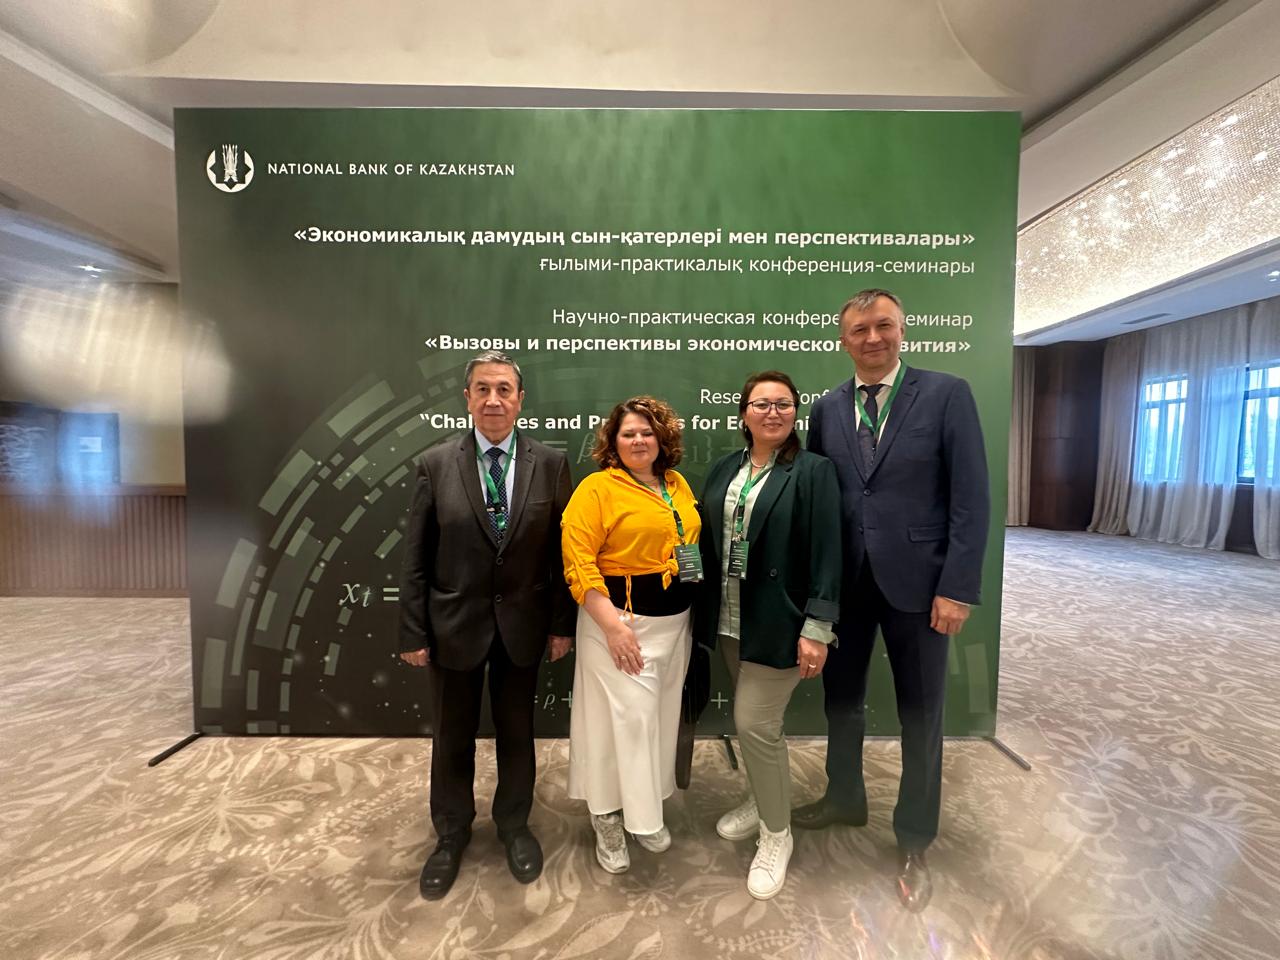 KazNU scientists participated in the conference of the  National Bank of Kazakhstan